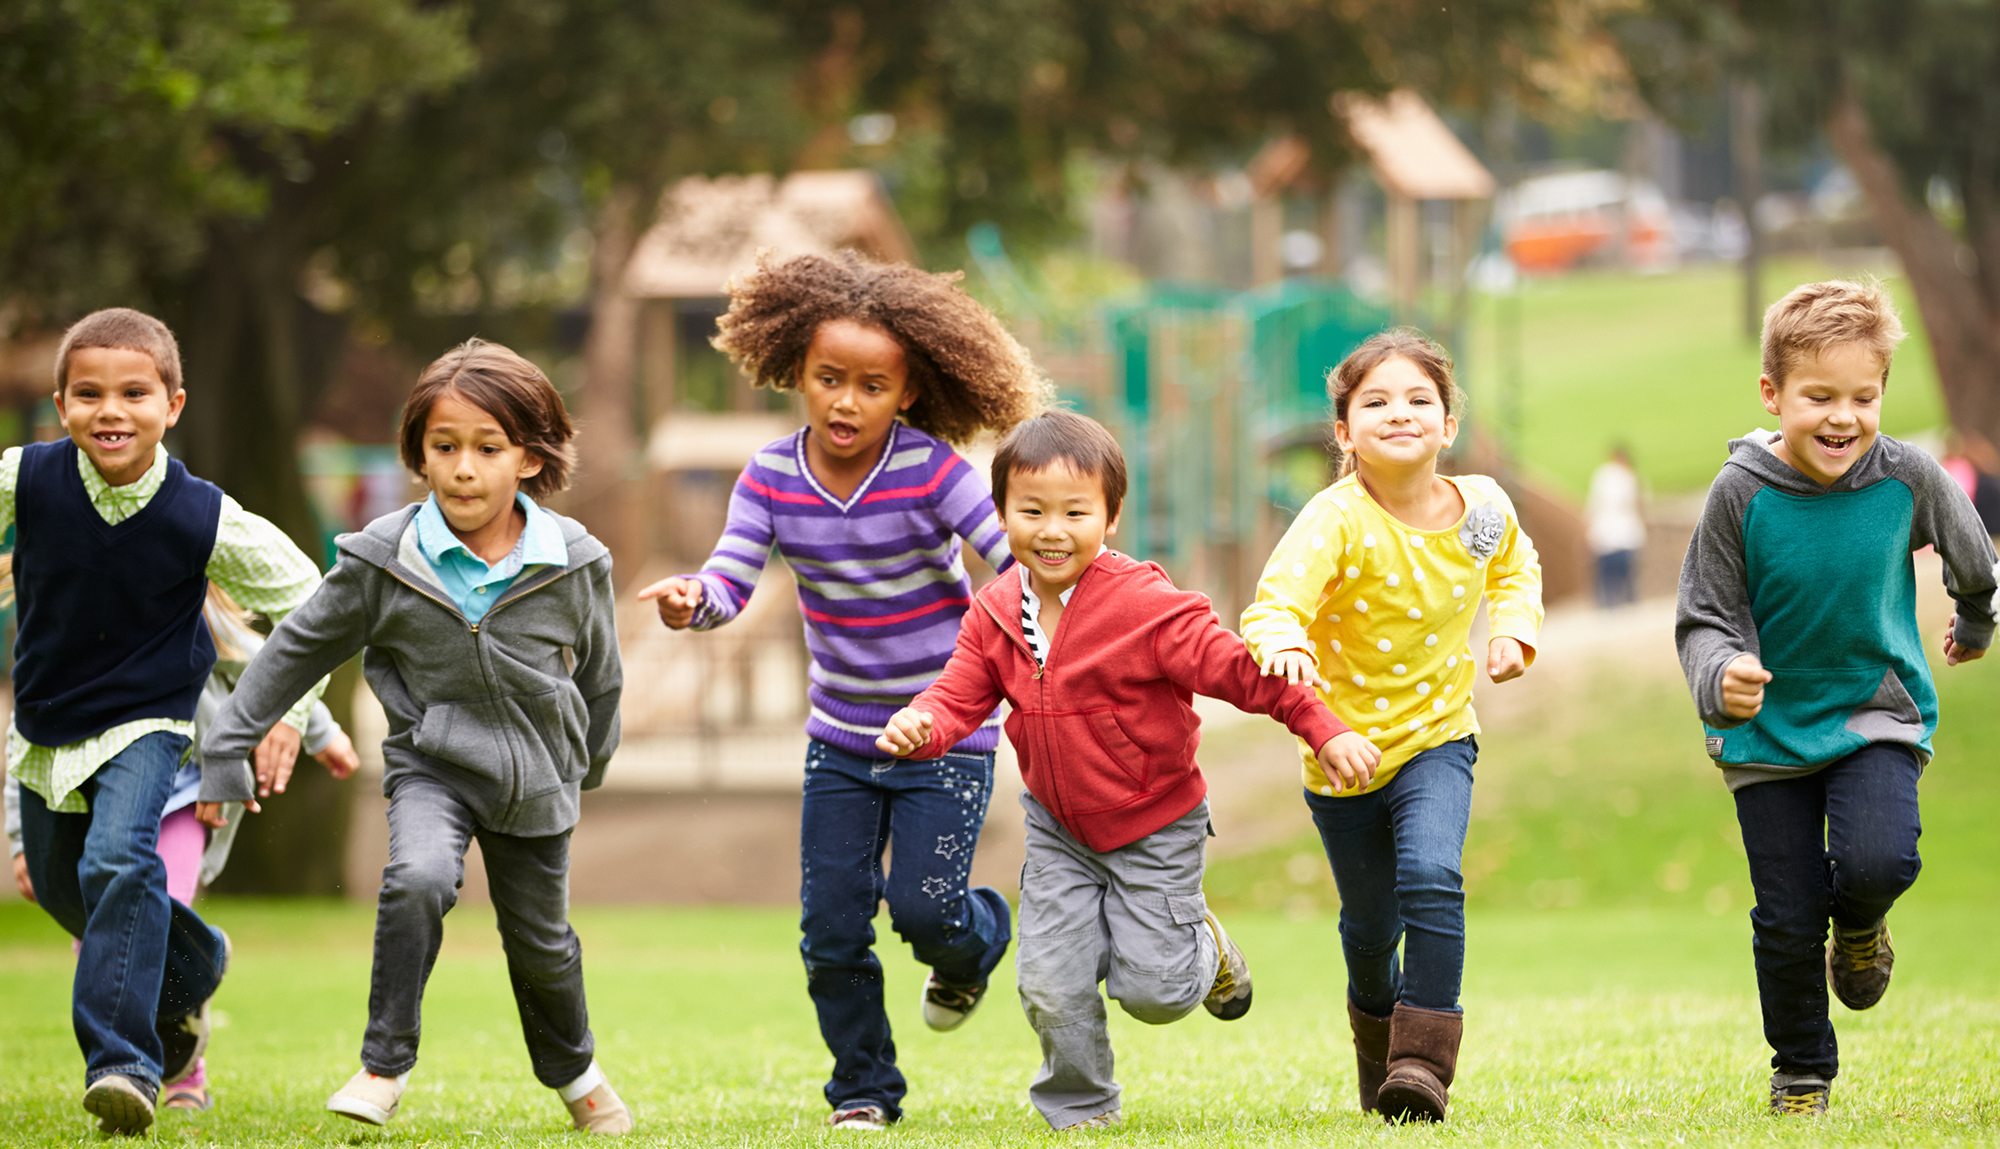 Several children run together in the park.